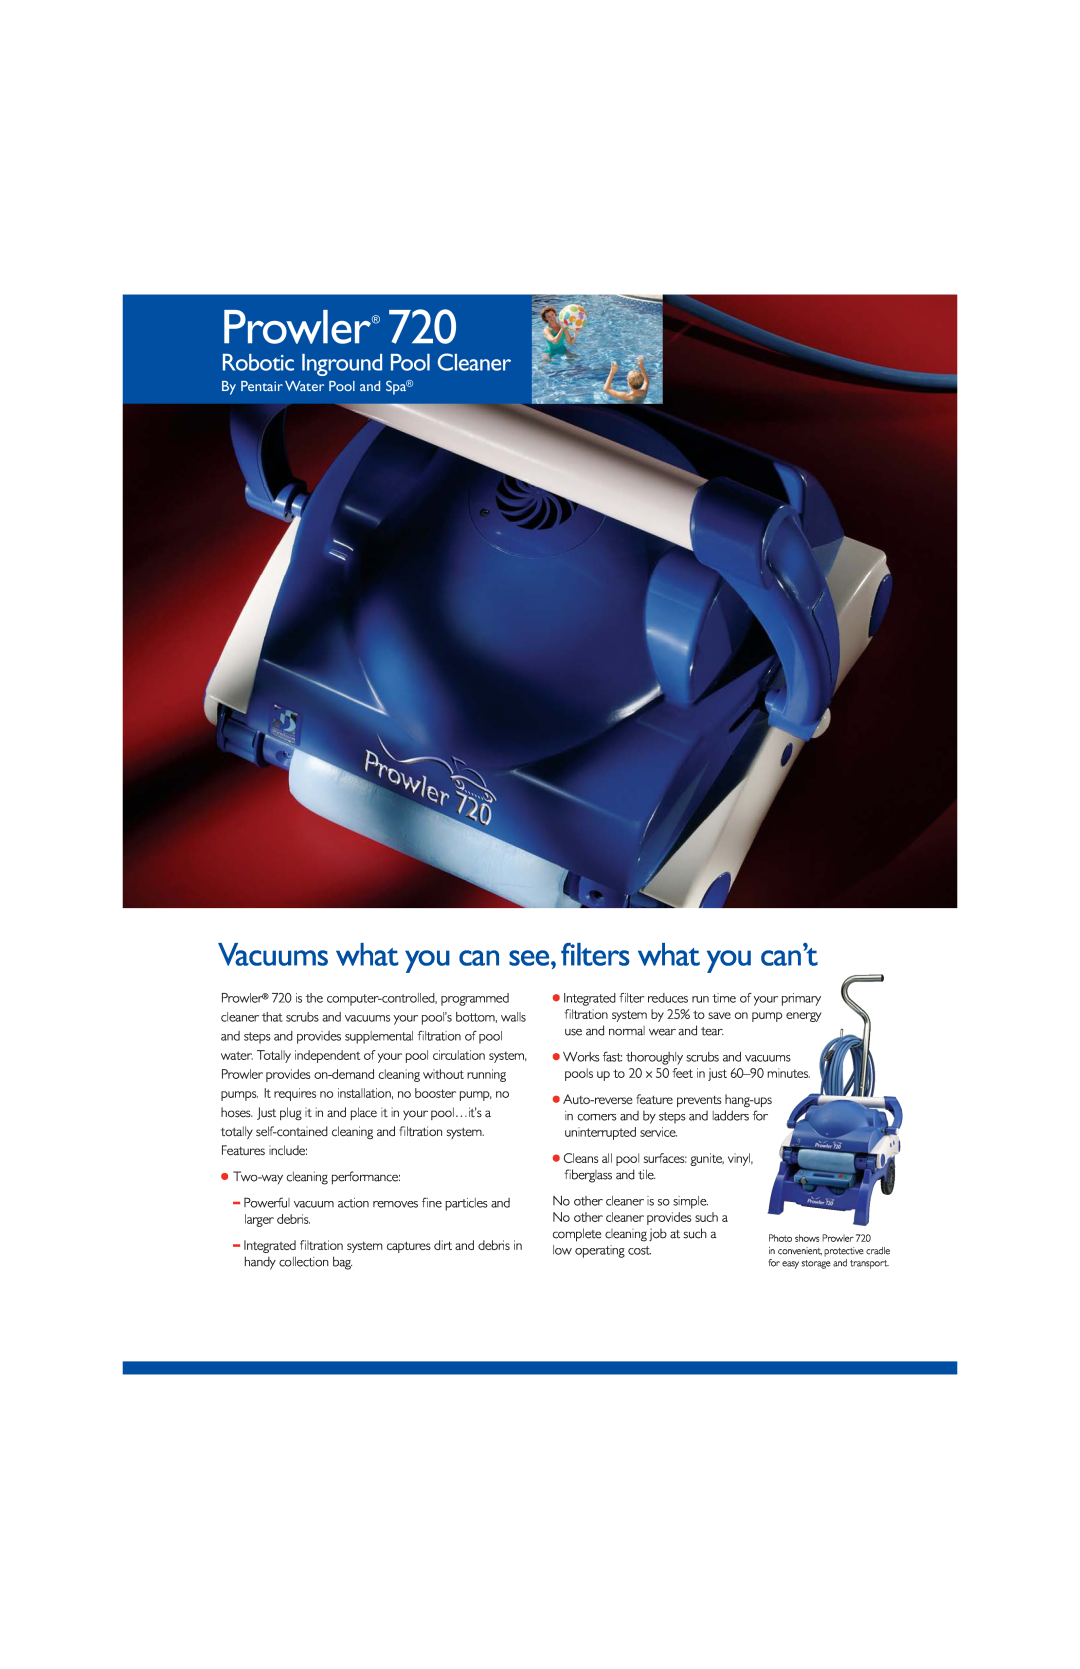 Pentair Prowler 720 manual Vacuums what you can see, filters what you can’t, Robotic Inground Pool Cleaner 